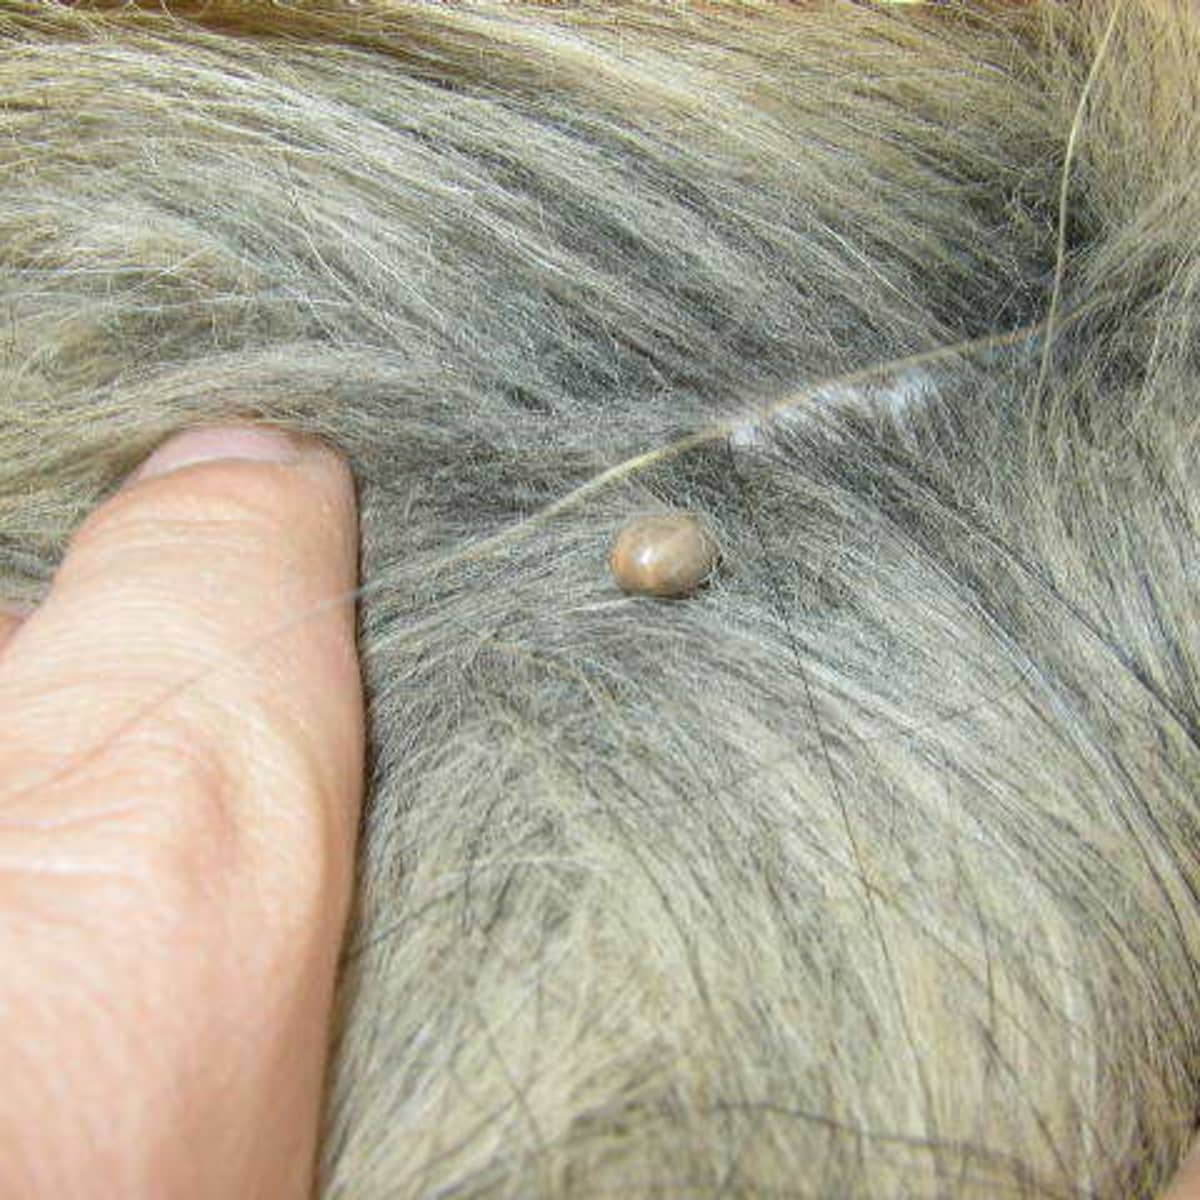 How to Remove an Embedded Tick From Your Dog - PetHelpful